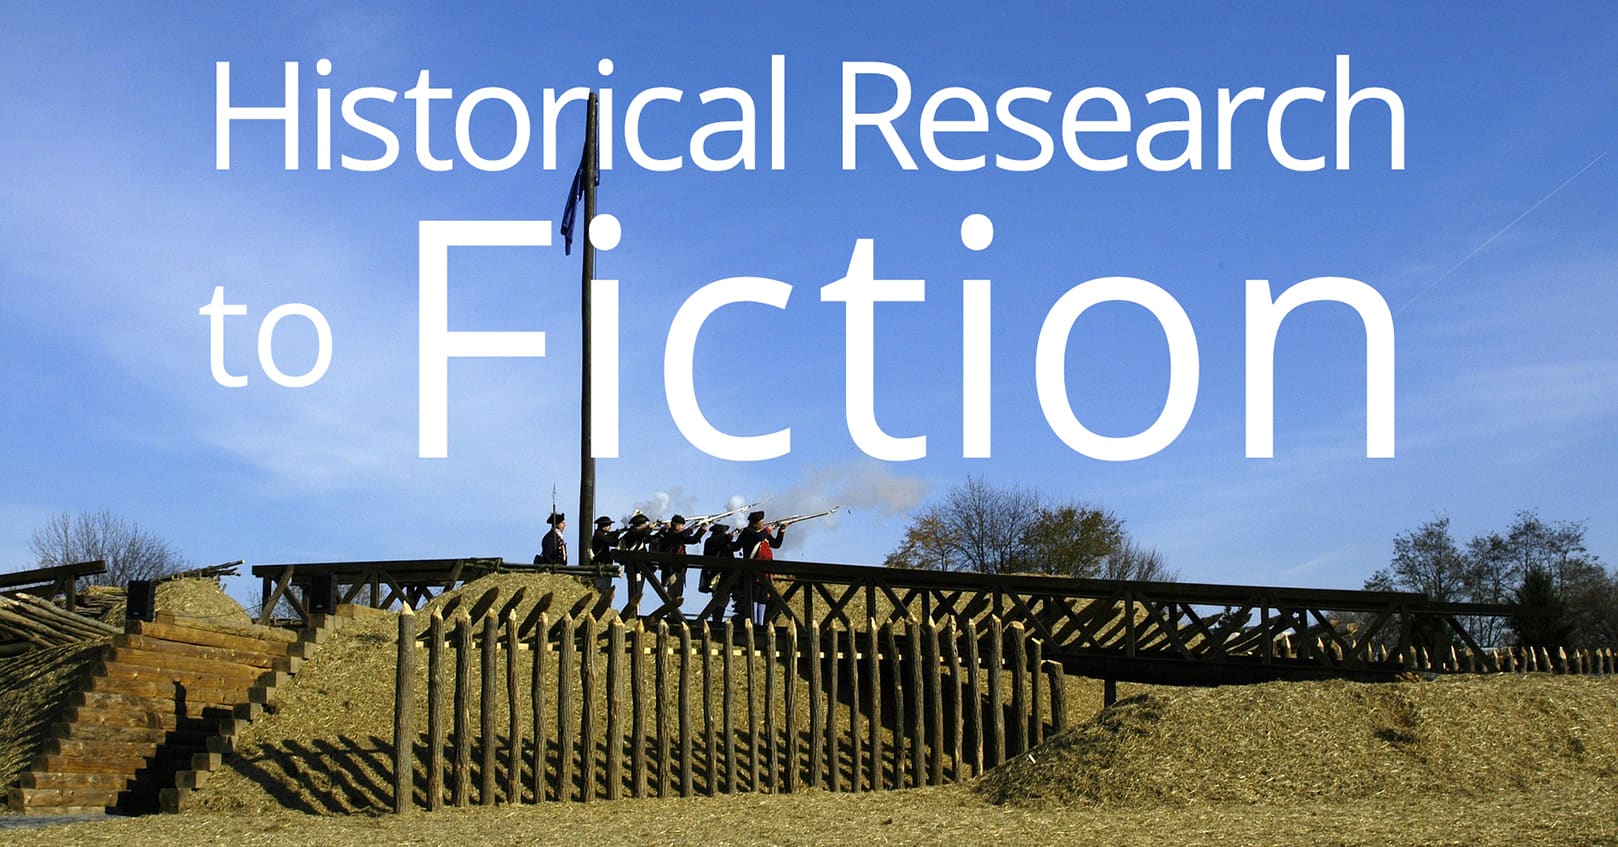 historical research to fiction